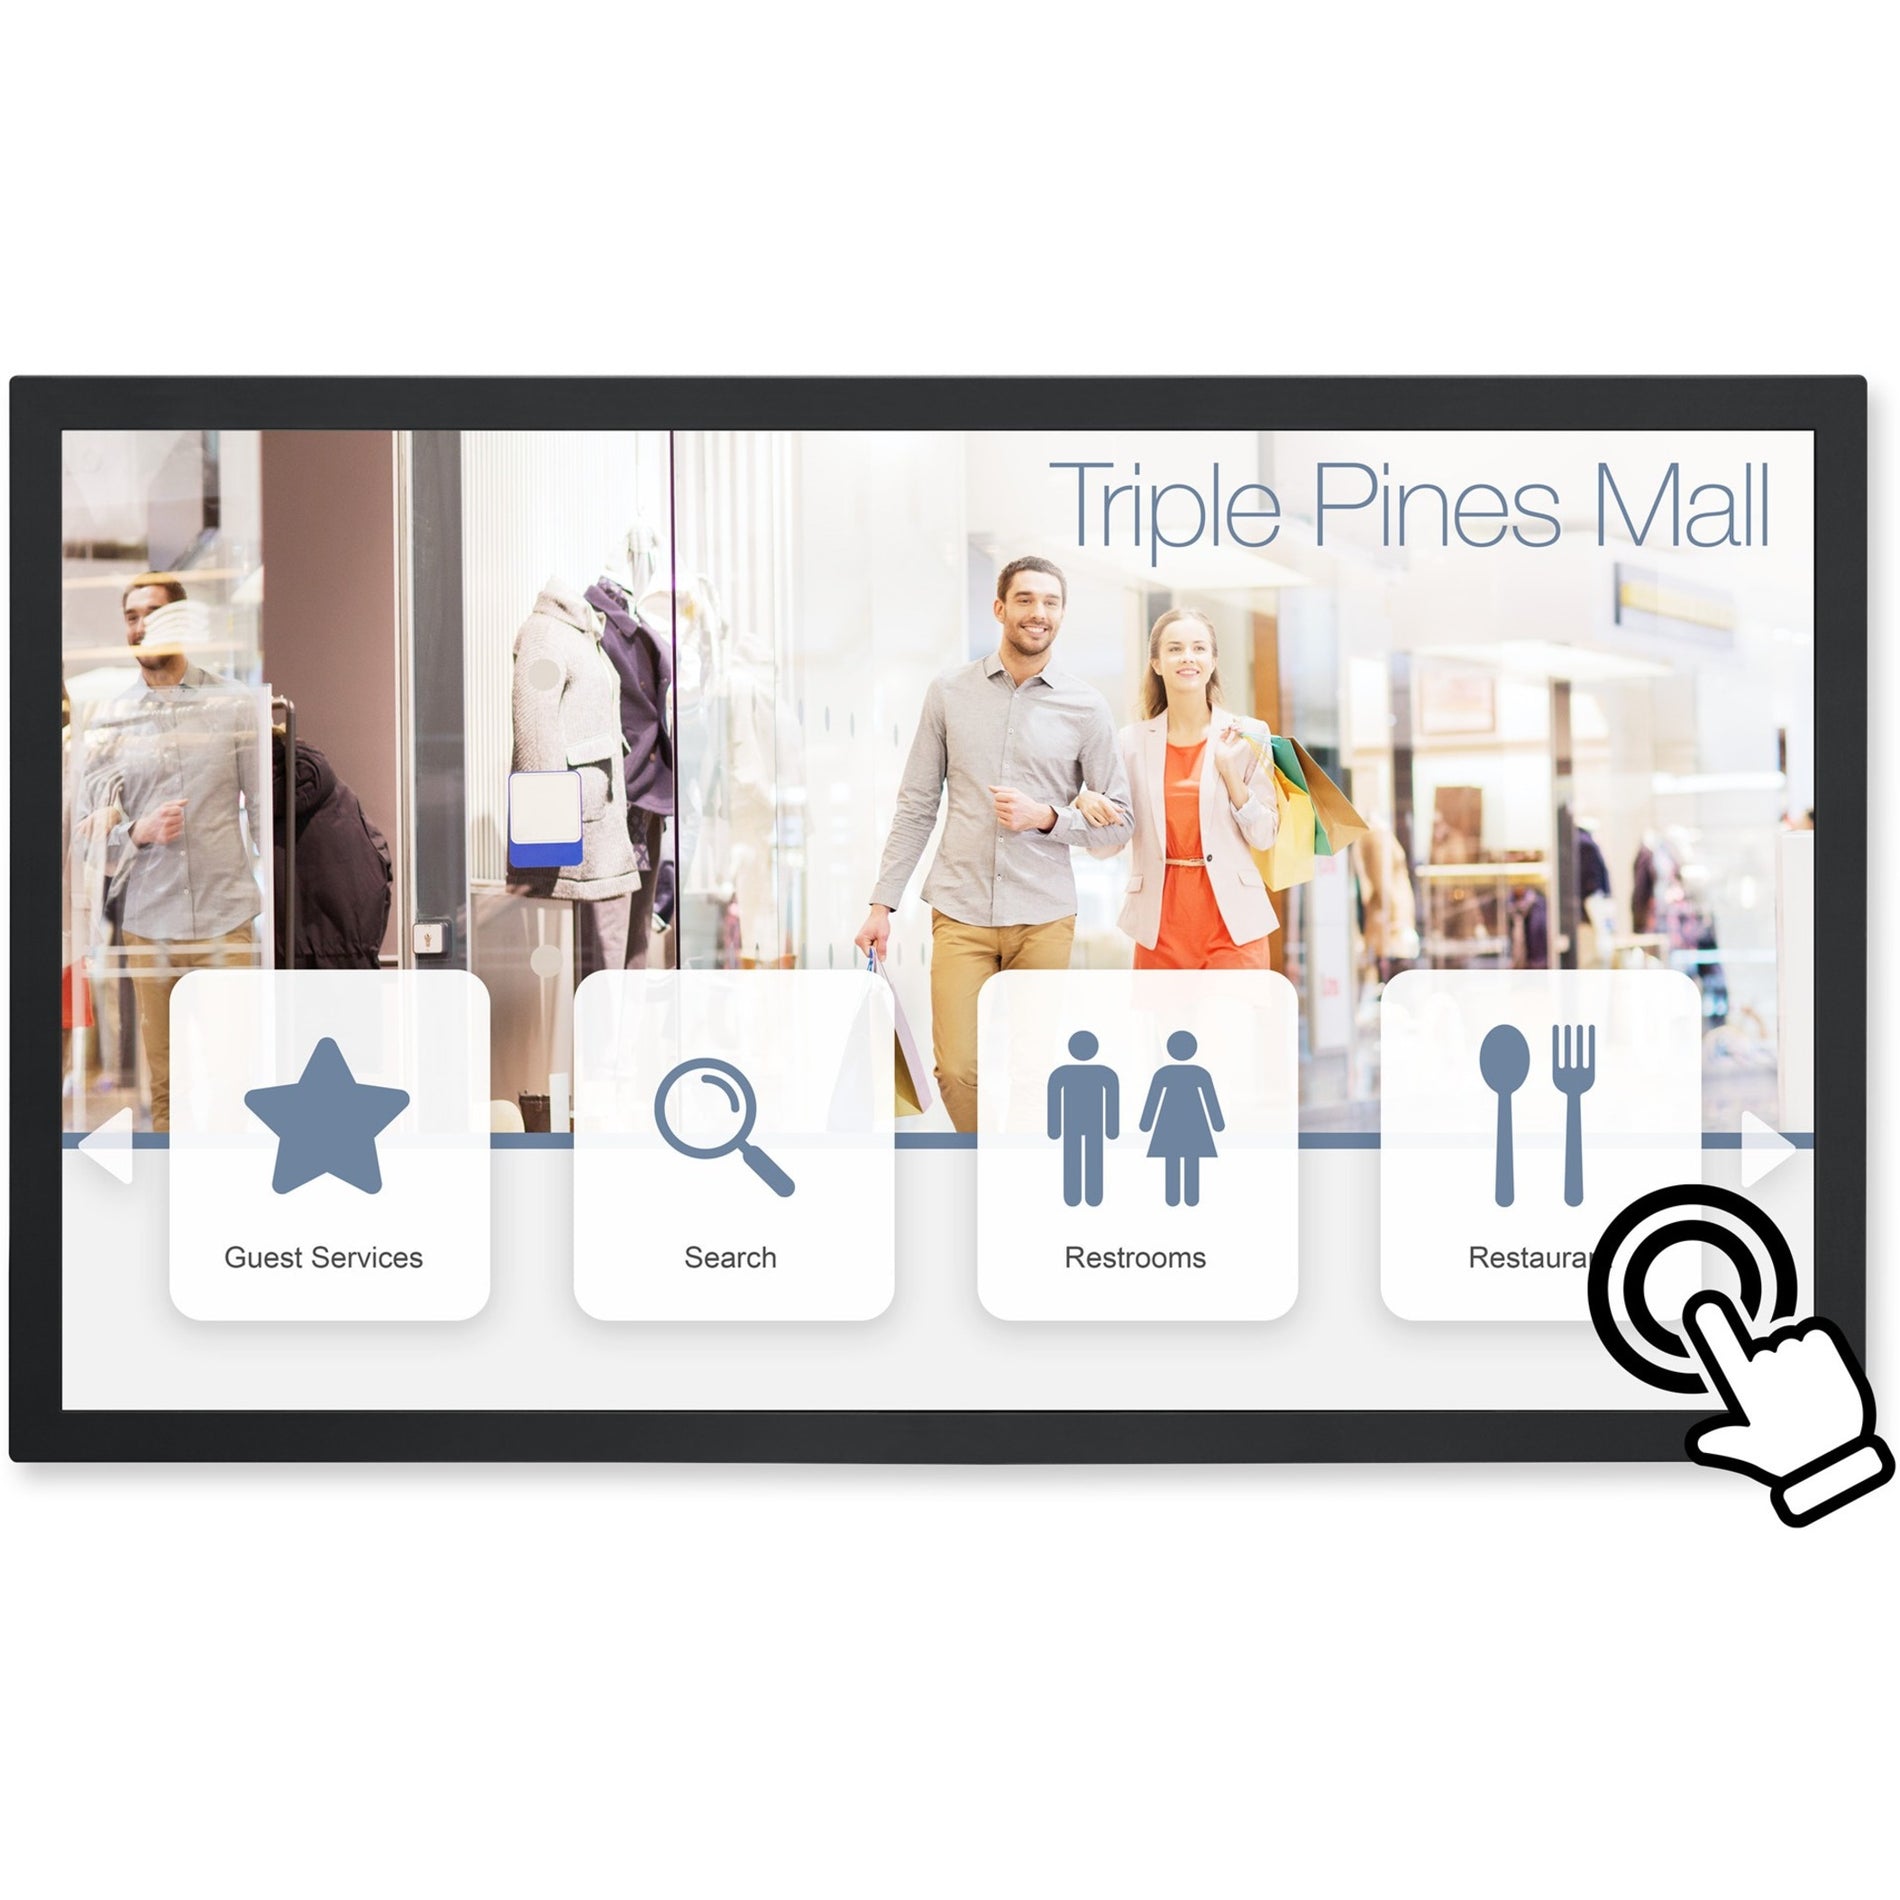 Sharp NEC Display ME651-IR 65" Ultra High Definition Commercial Display with Pre-installed IR Touch, 10 Touchpoints, 400 Nit, 2160p [Discontinued]